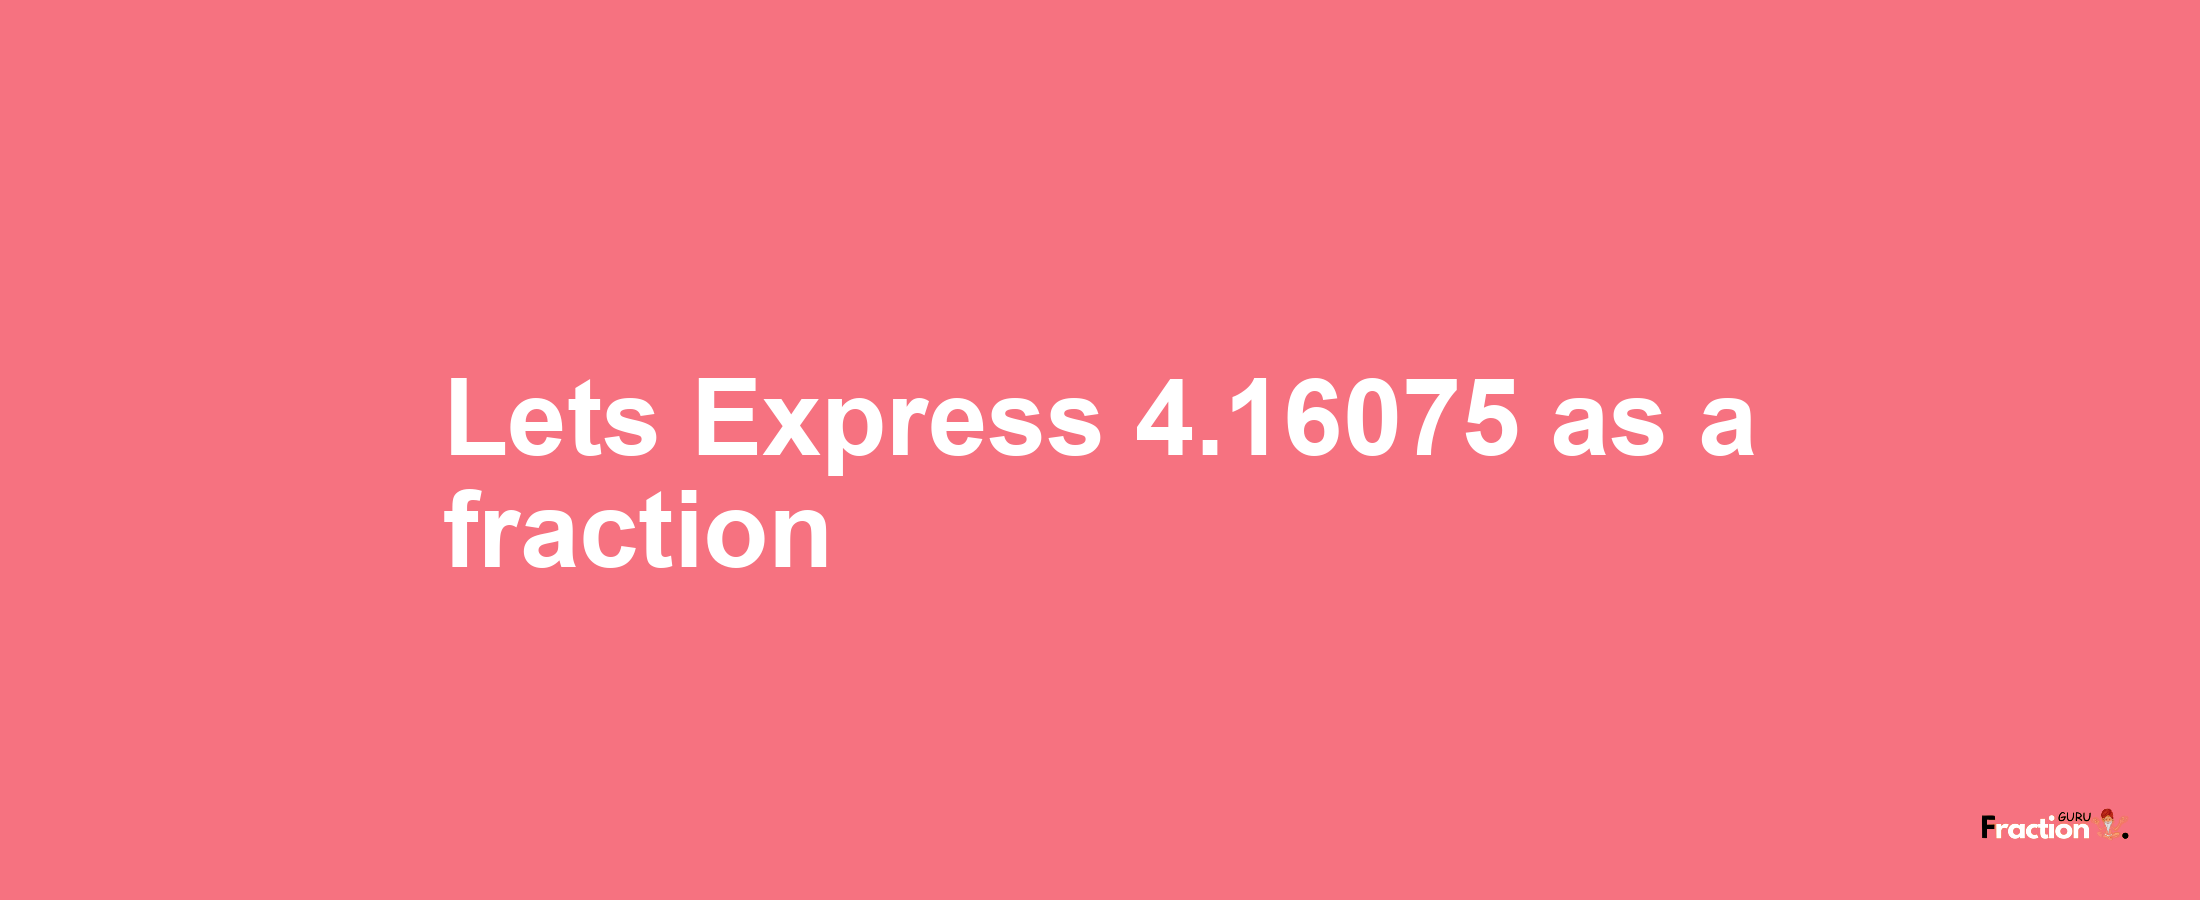 Lets Express 4.16075 as afraction